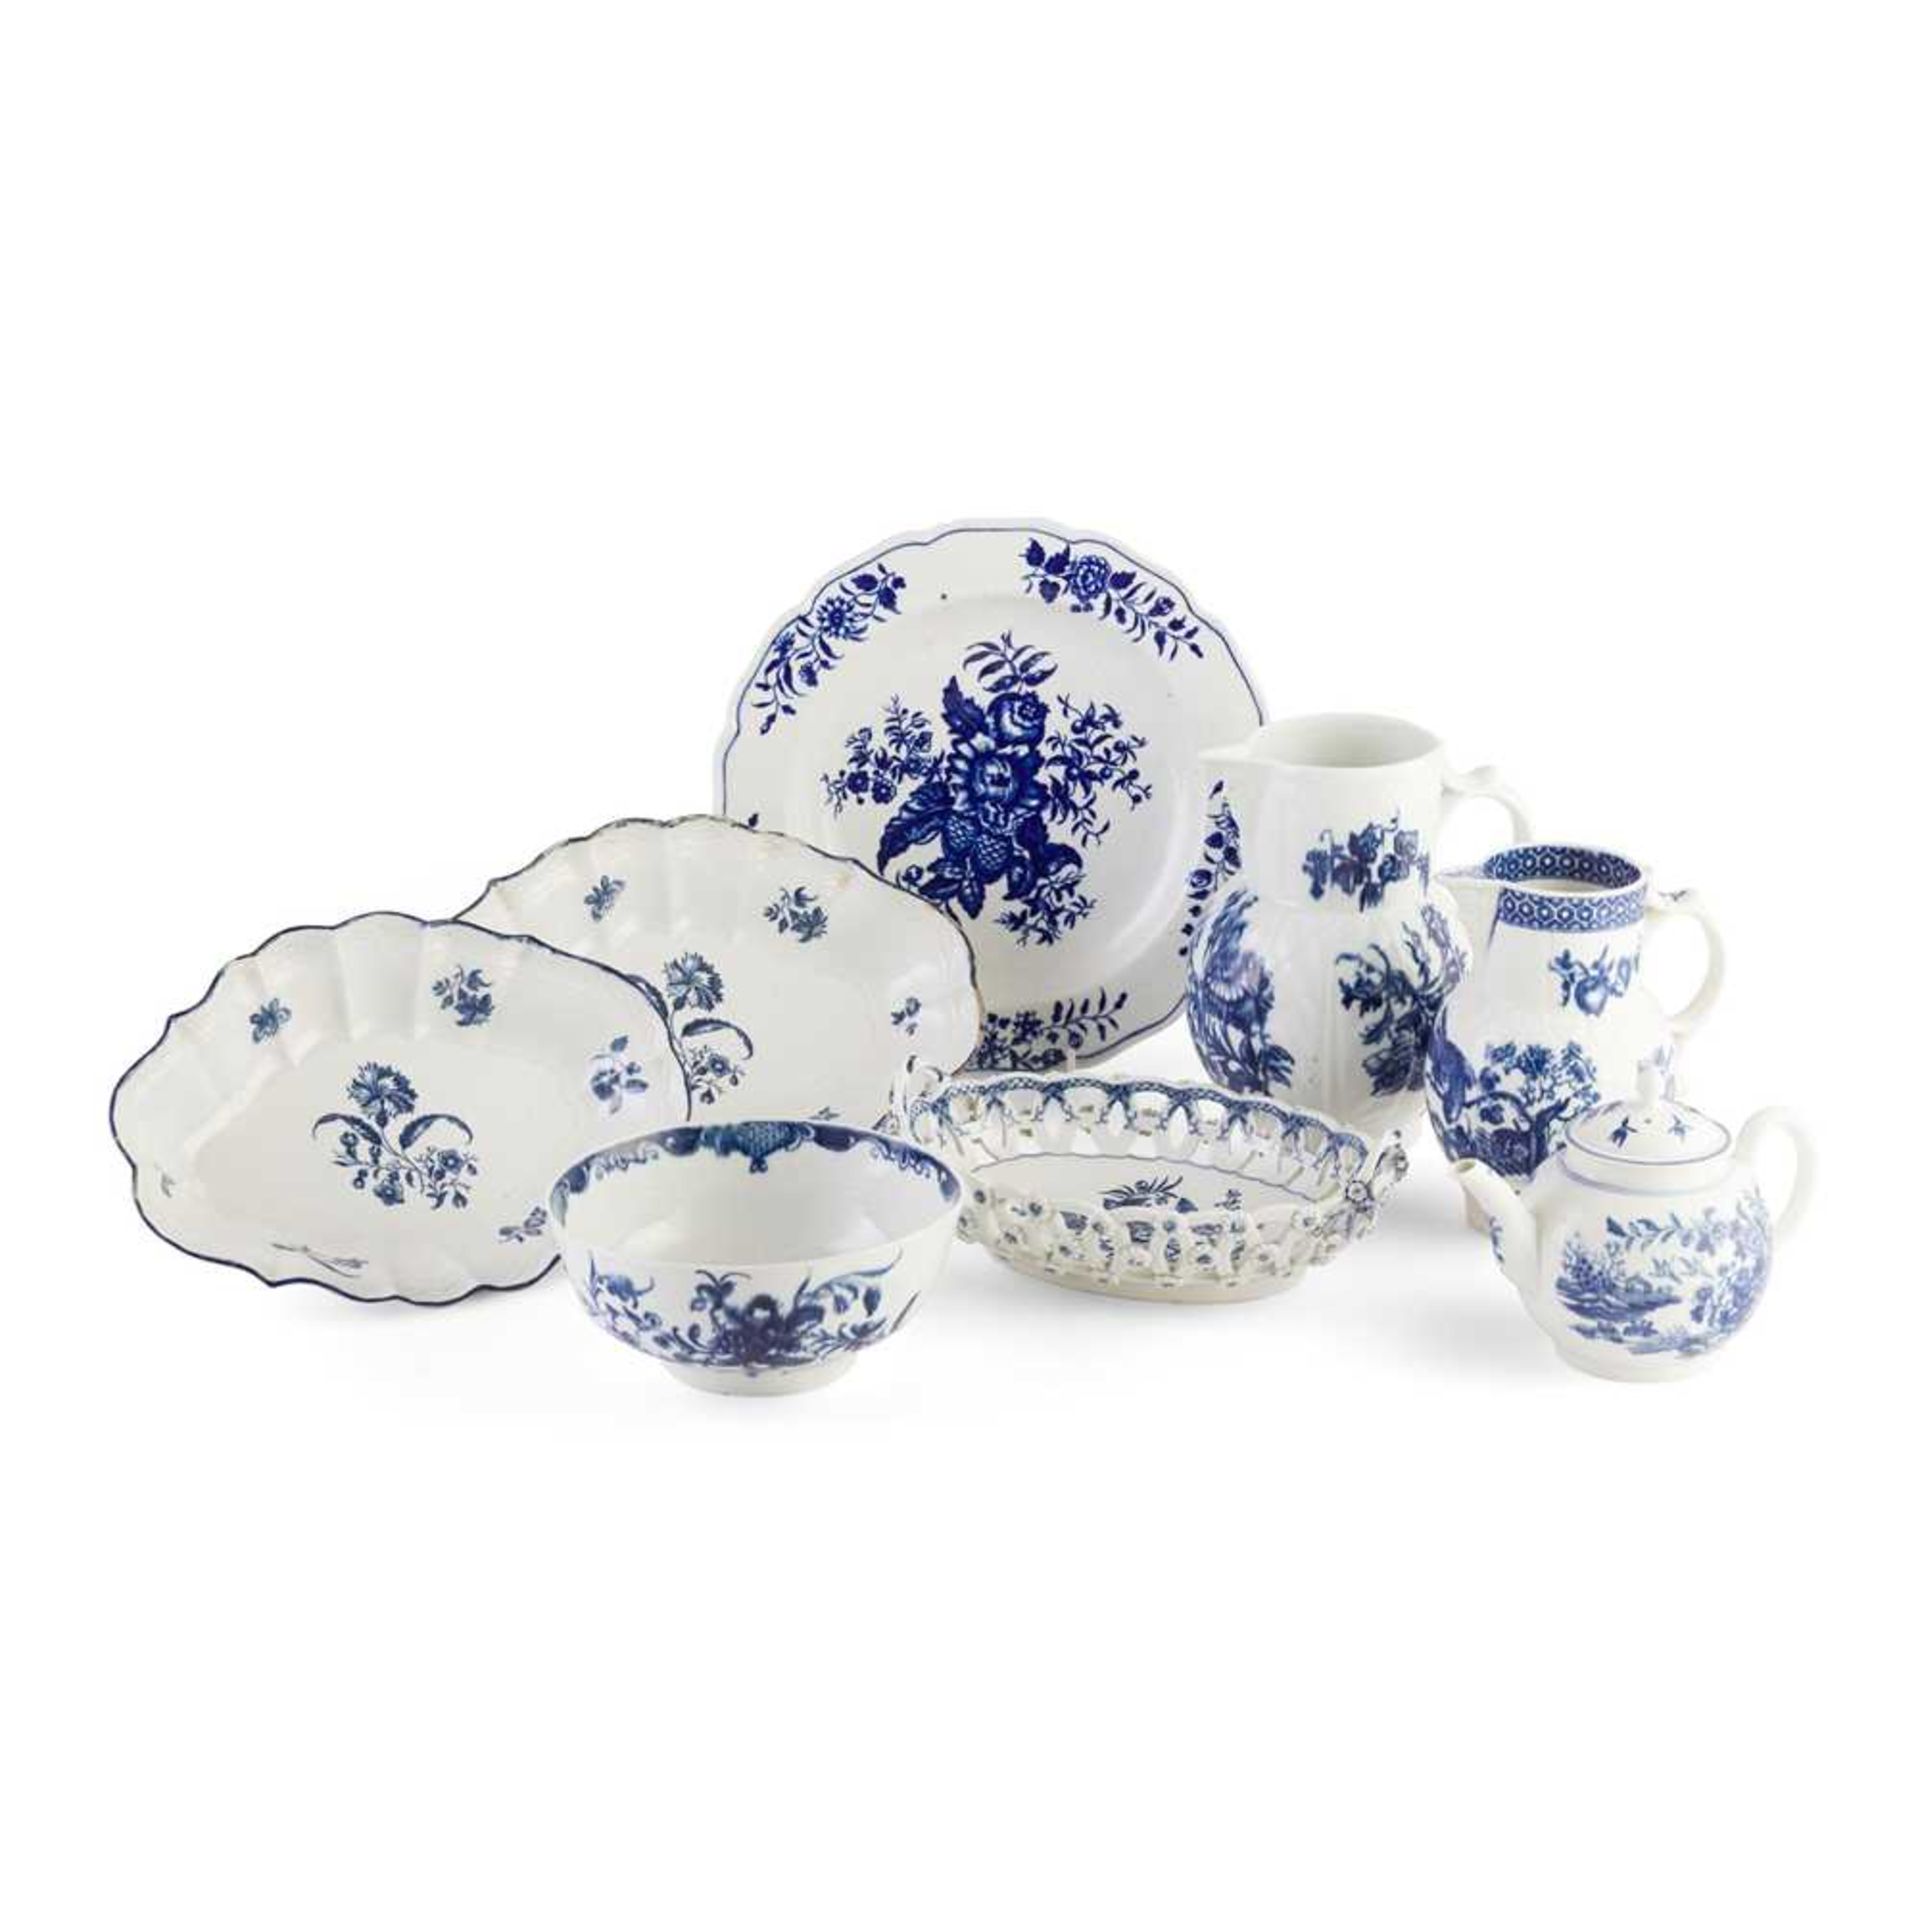 GROUP OF BLUE AND WHITE WORCESTER PORCELAIN LATE 18TH CENTURY